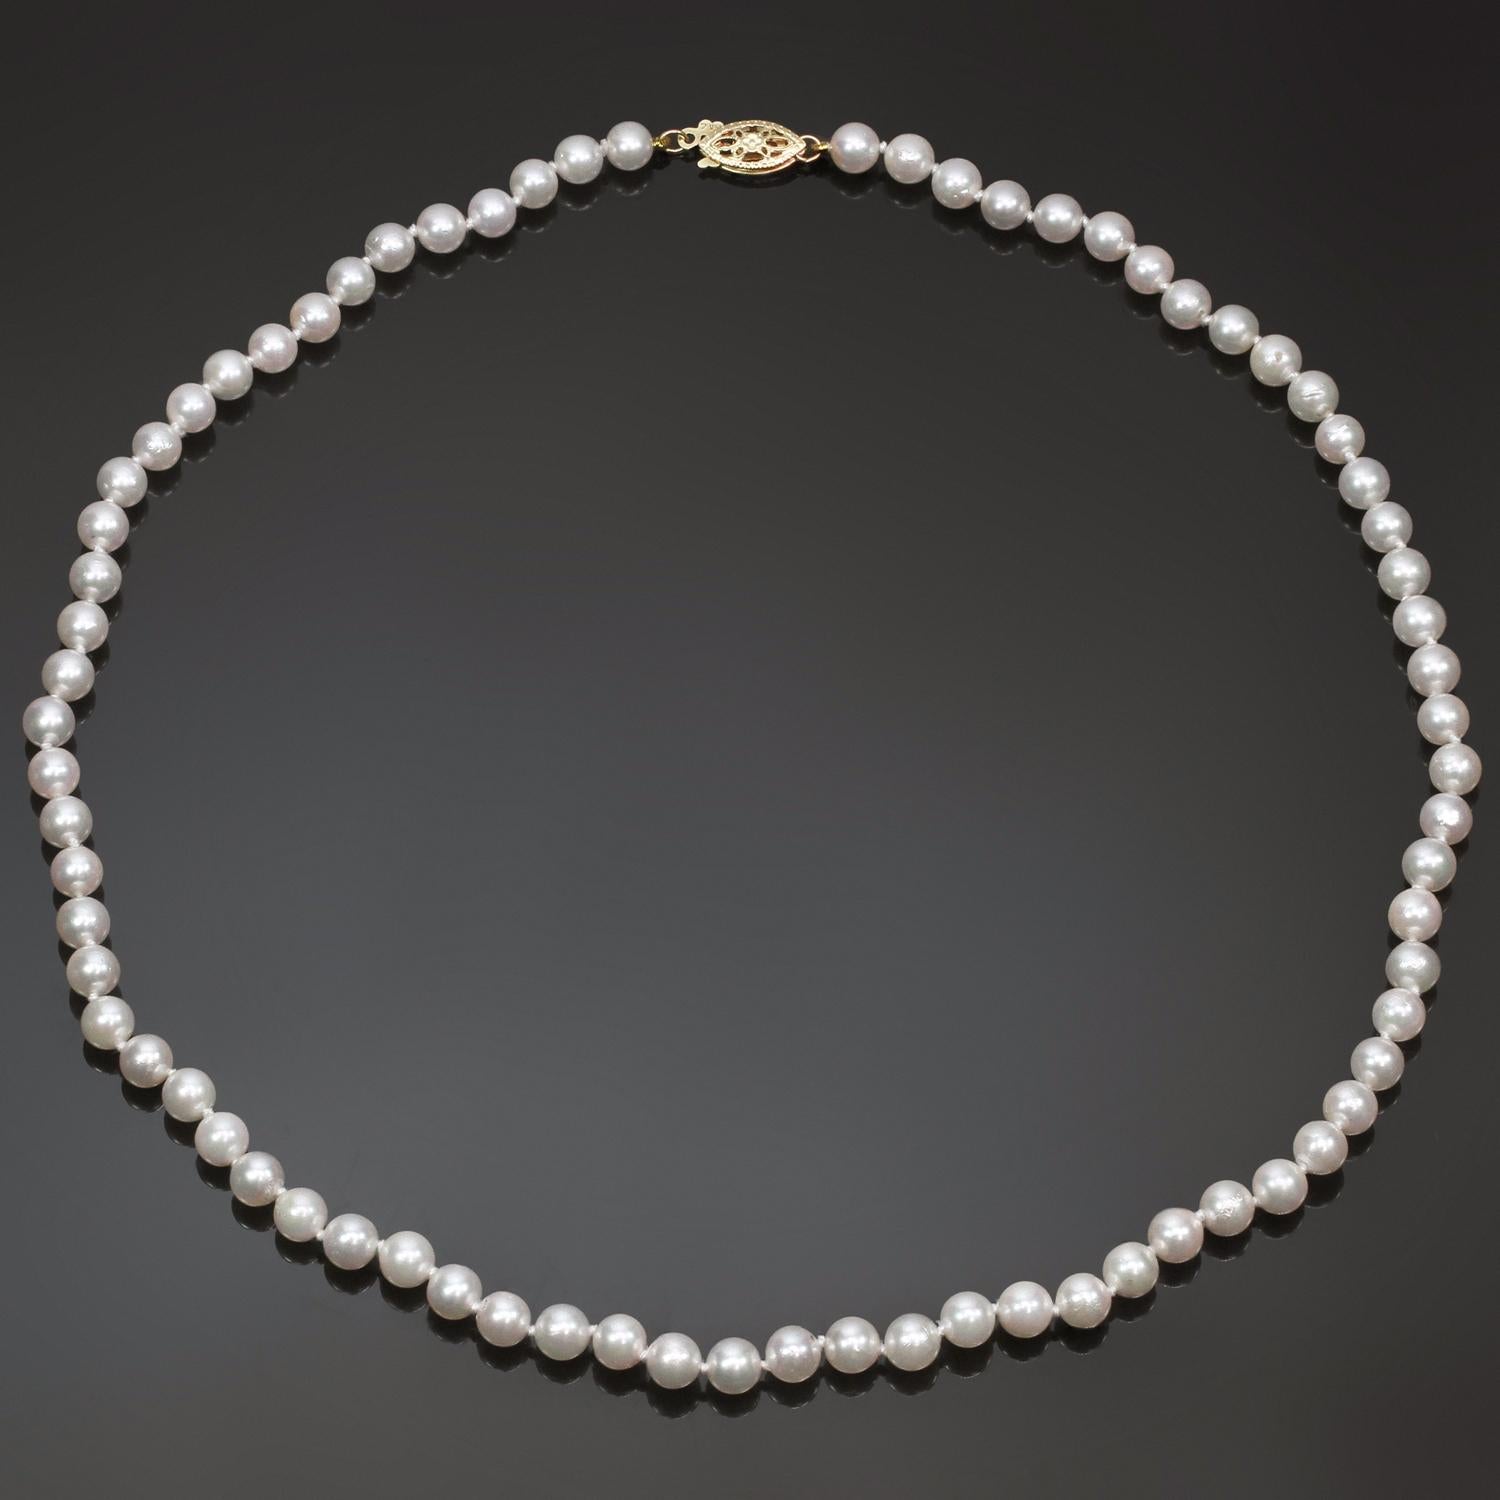 A classic strand of 5.0mm cultured pearls featuring a pinkish even color and very high luster. Completed by a ornamental filigree clasp in 14k yellow gold. Shiny and beautiful.  Measurements: 0.19